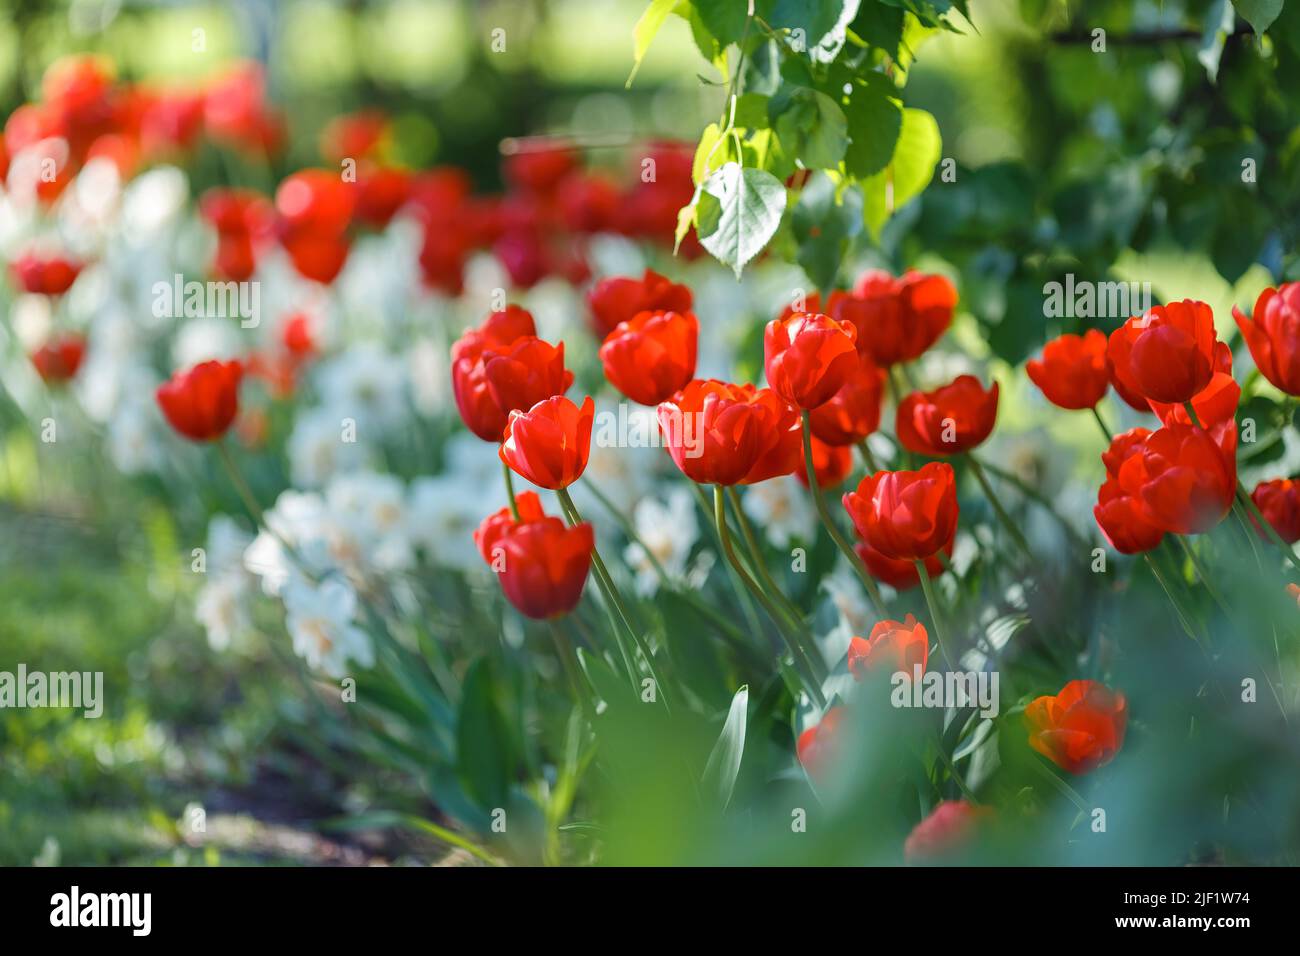 Flower bed with opened red tulips and white daffodils Stock Photo